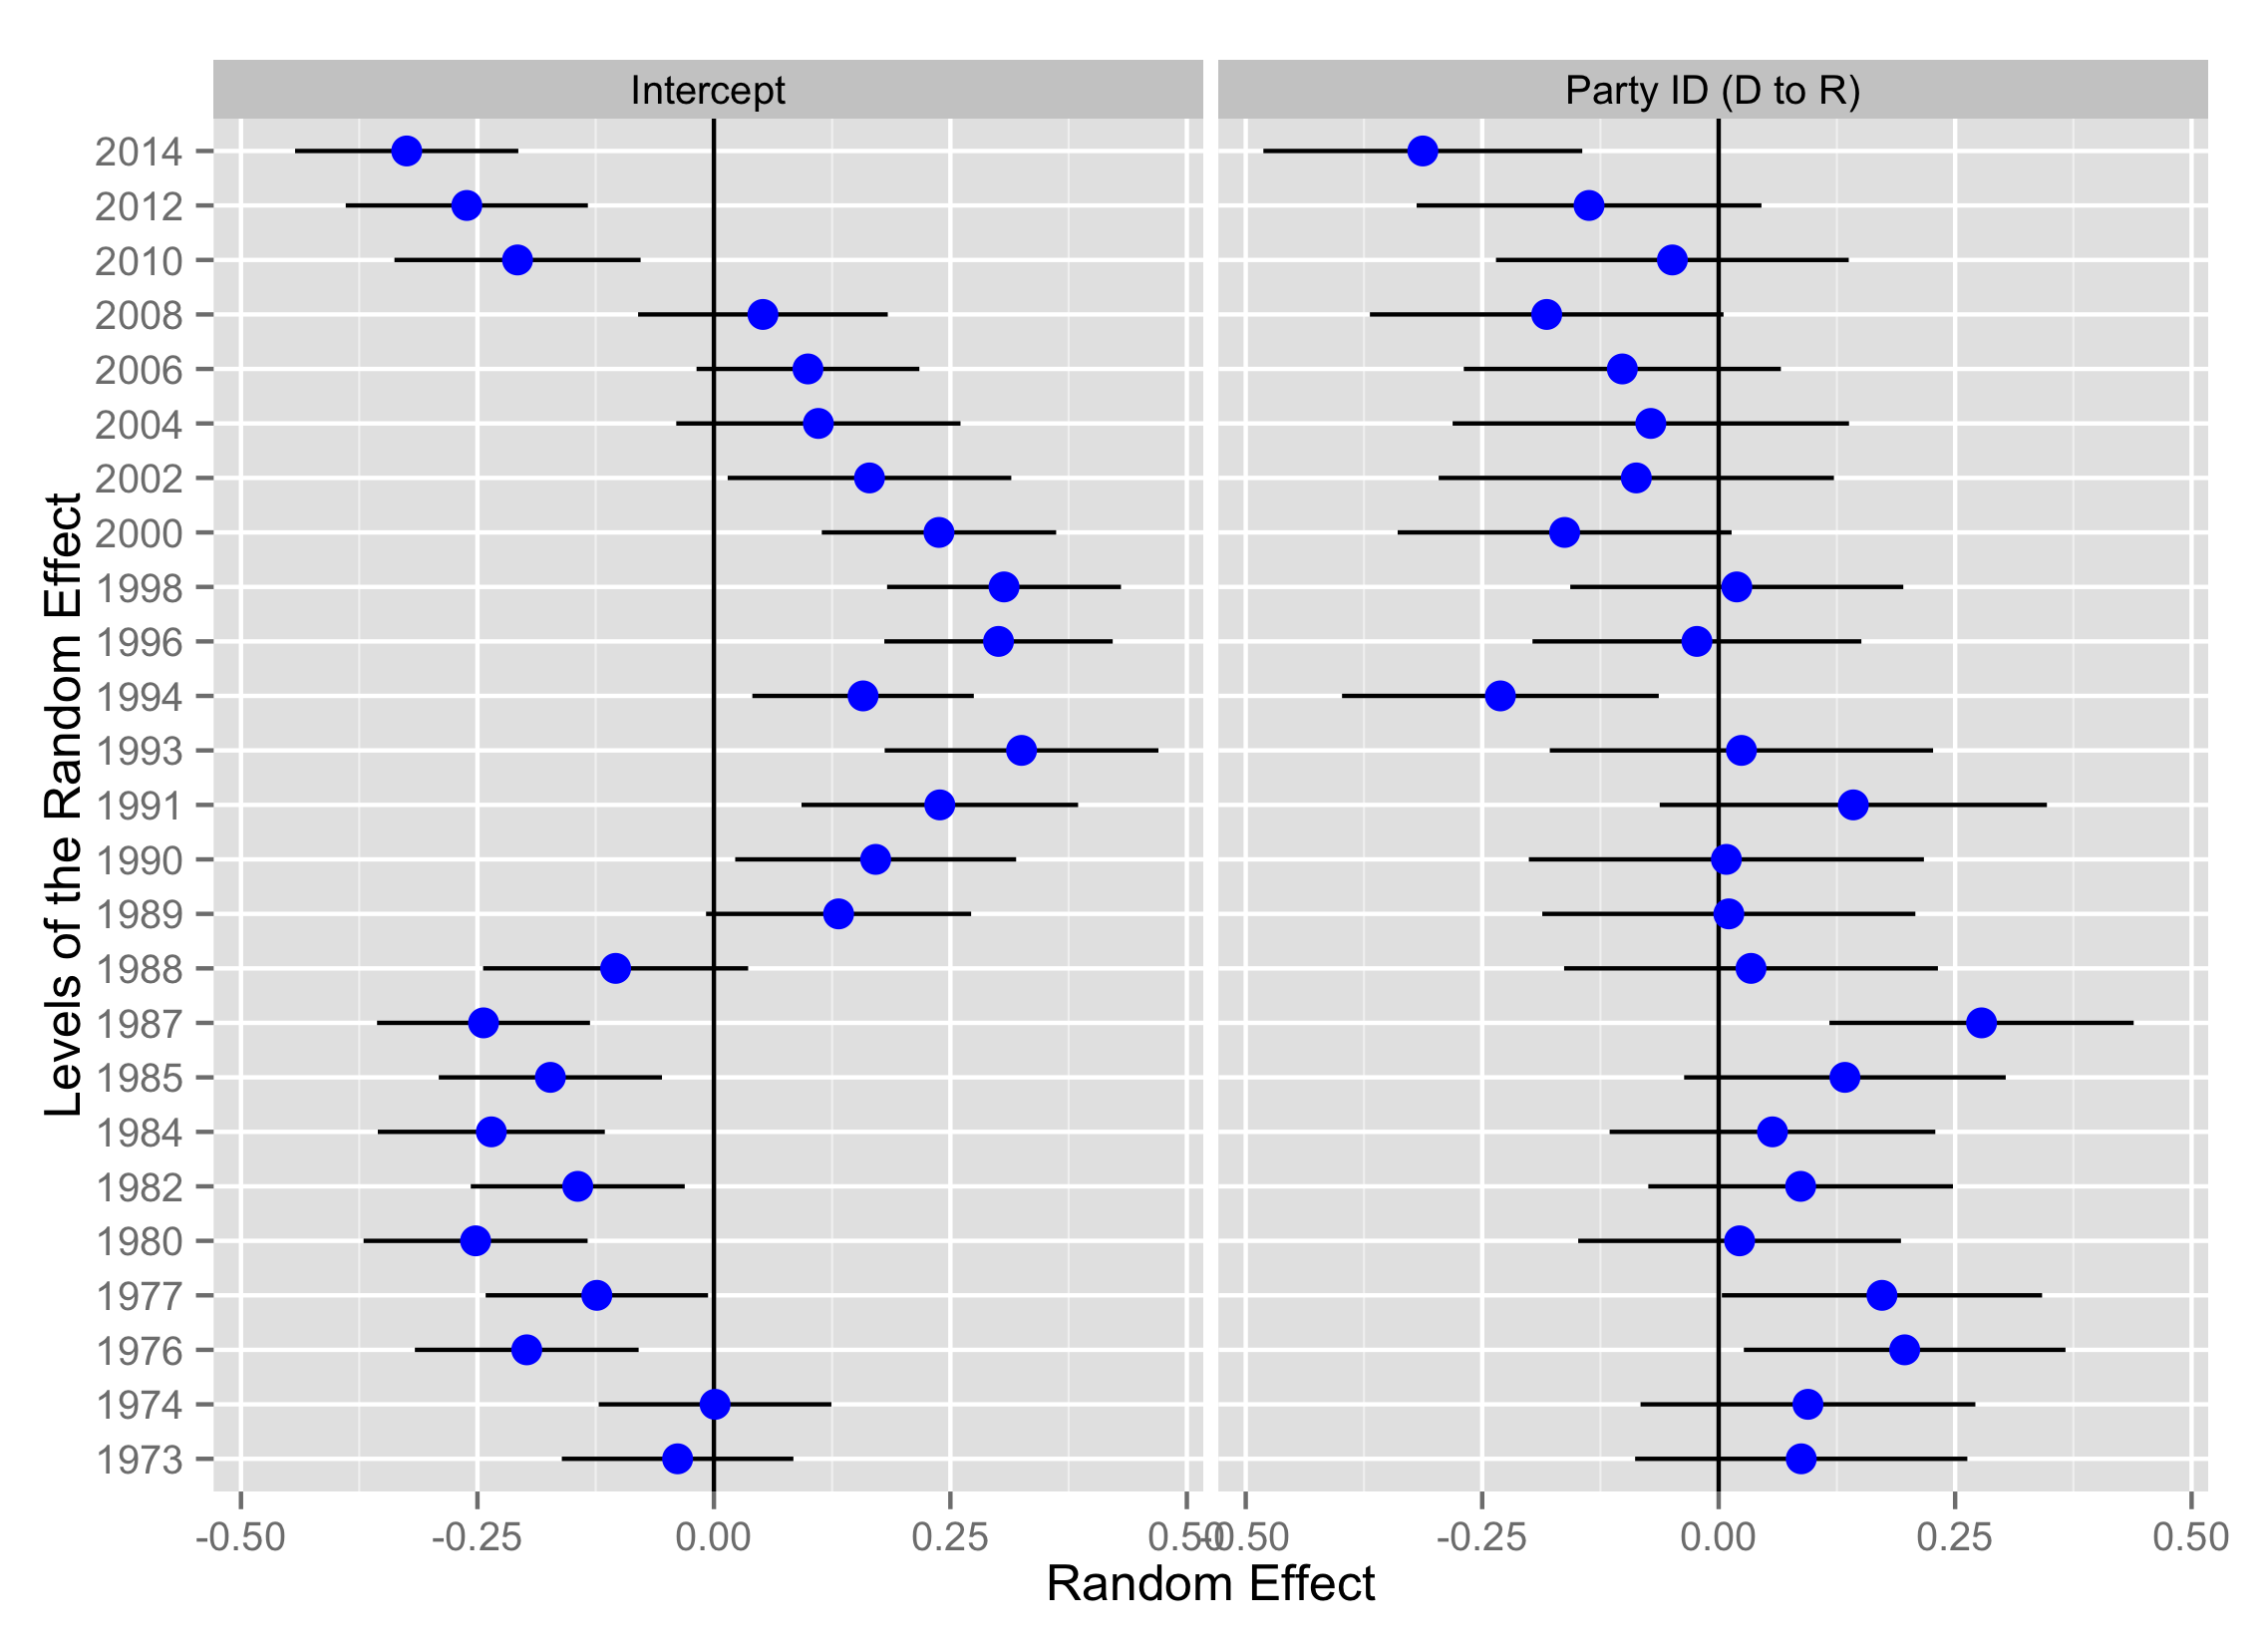 A caterpillar plot of the random effects in Model 1 (support for police permits) with random intercept for year and random slope for party ID.